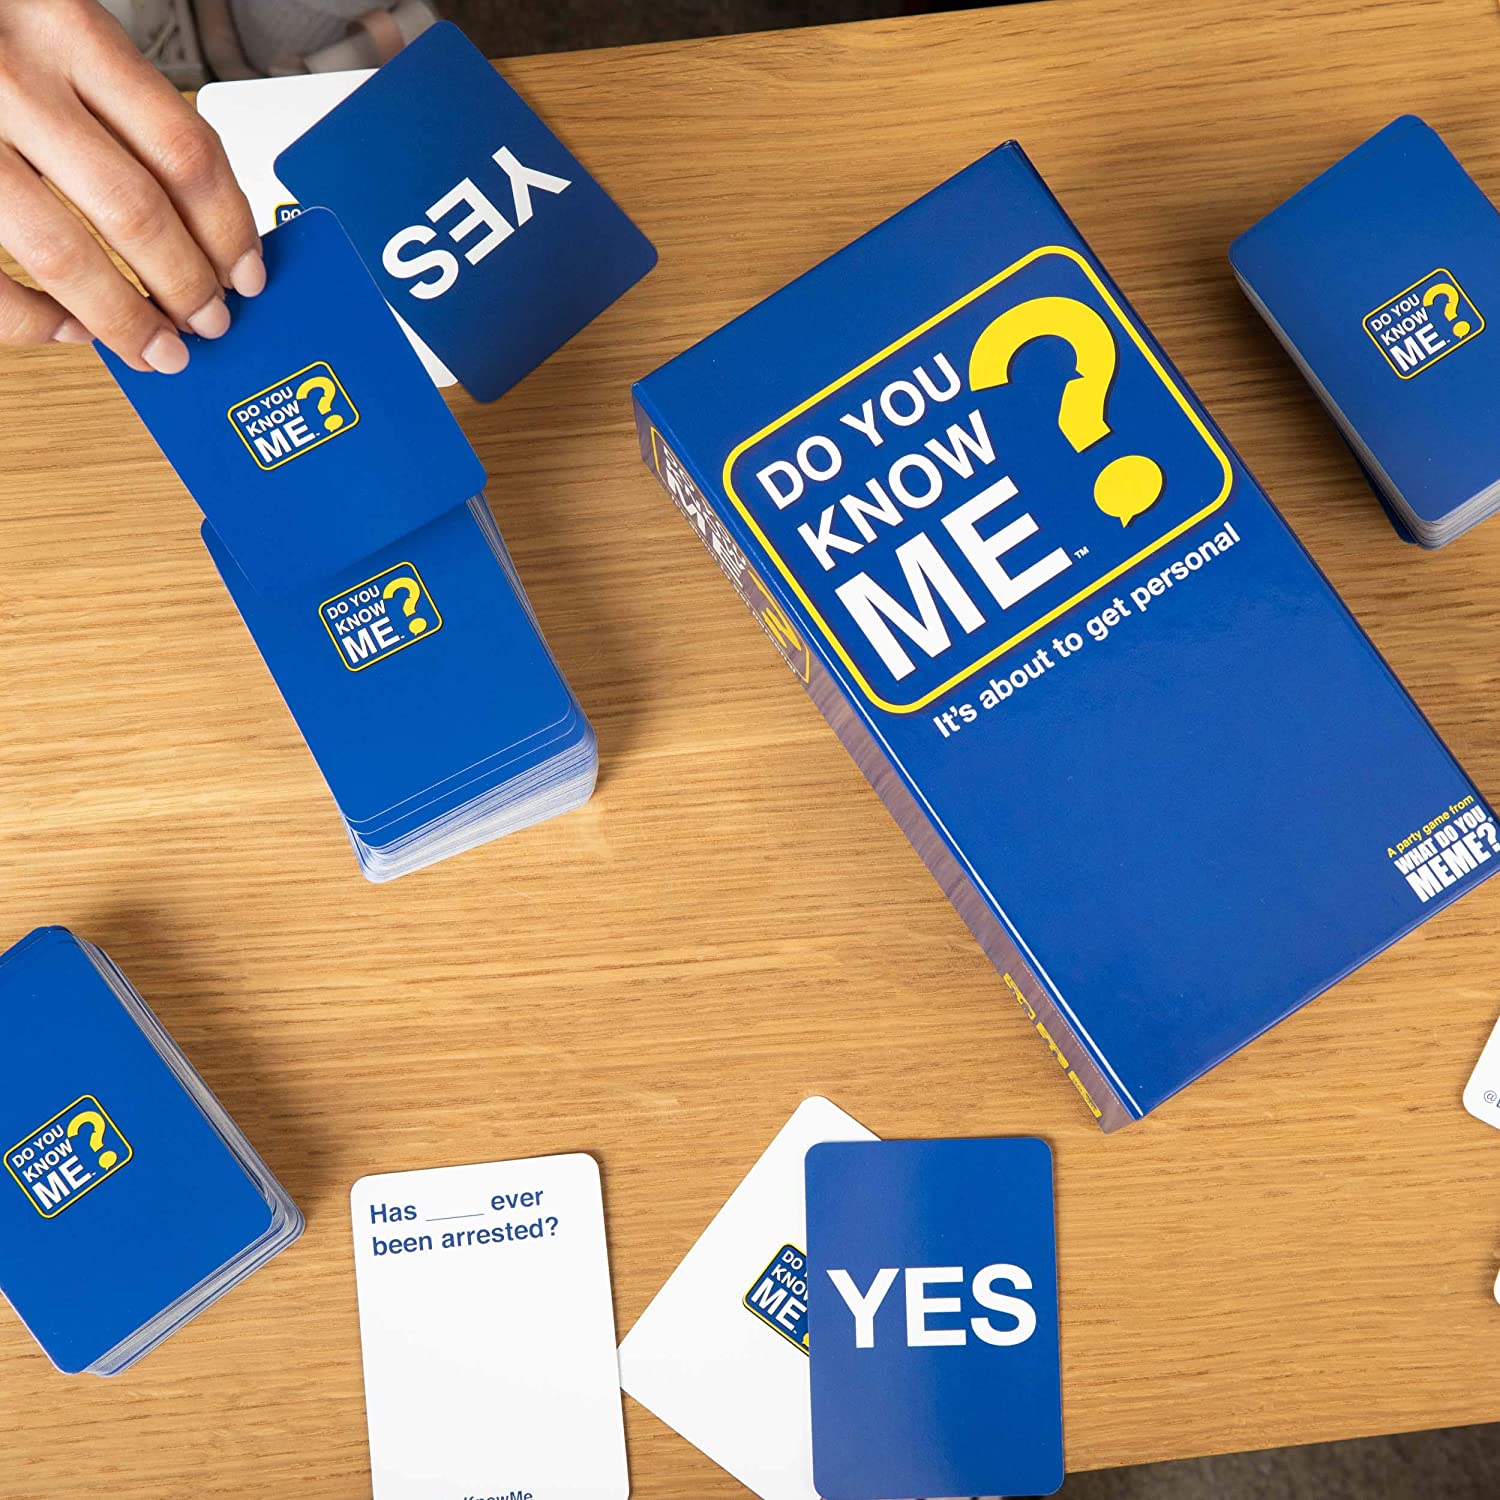 Do You Know Me? the Card Game that Puts You and Your Friends in the Hot Seat by What Do You Meme? - image 8 of 10